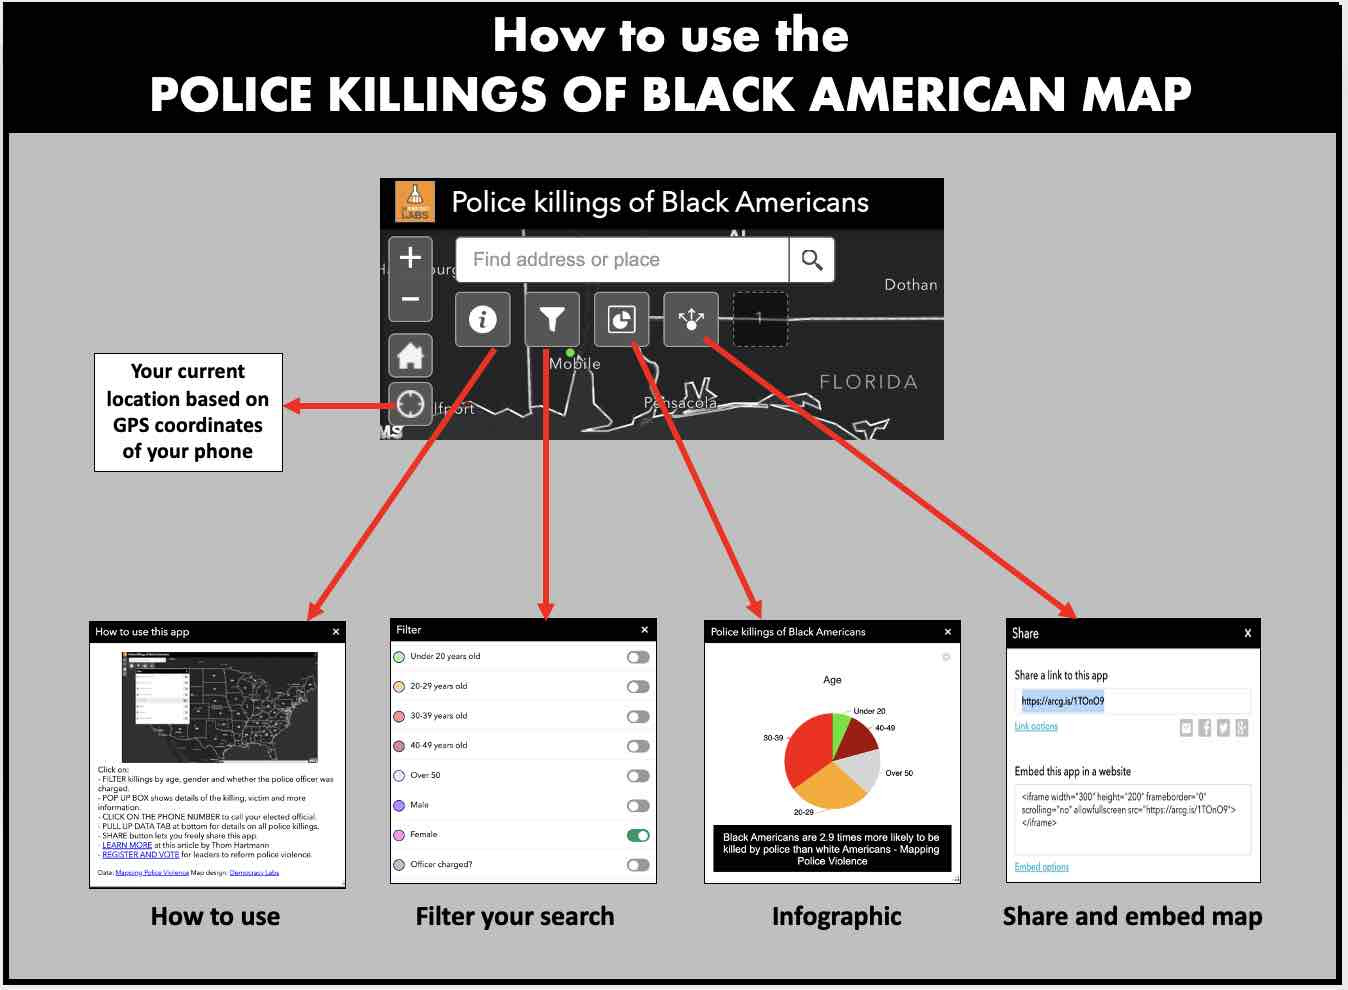 How to use the map to understand facts behind the Police Killings of over 2,700 Black Americans